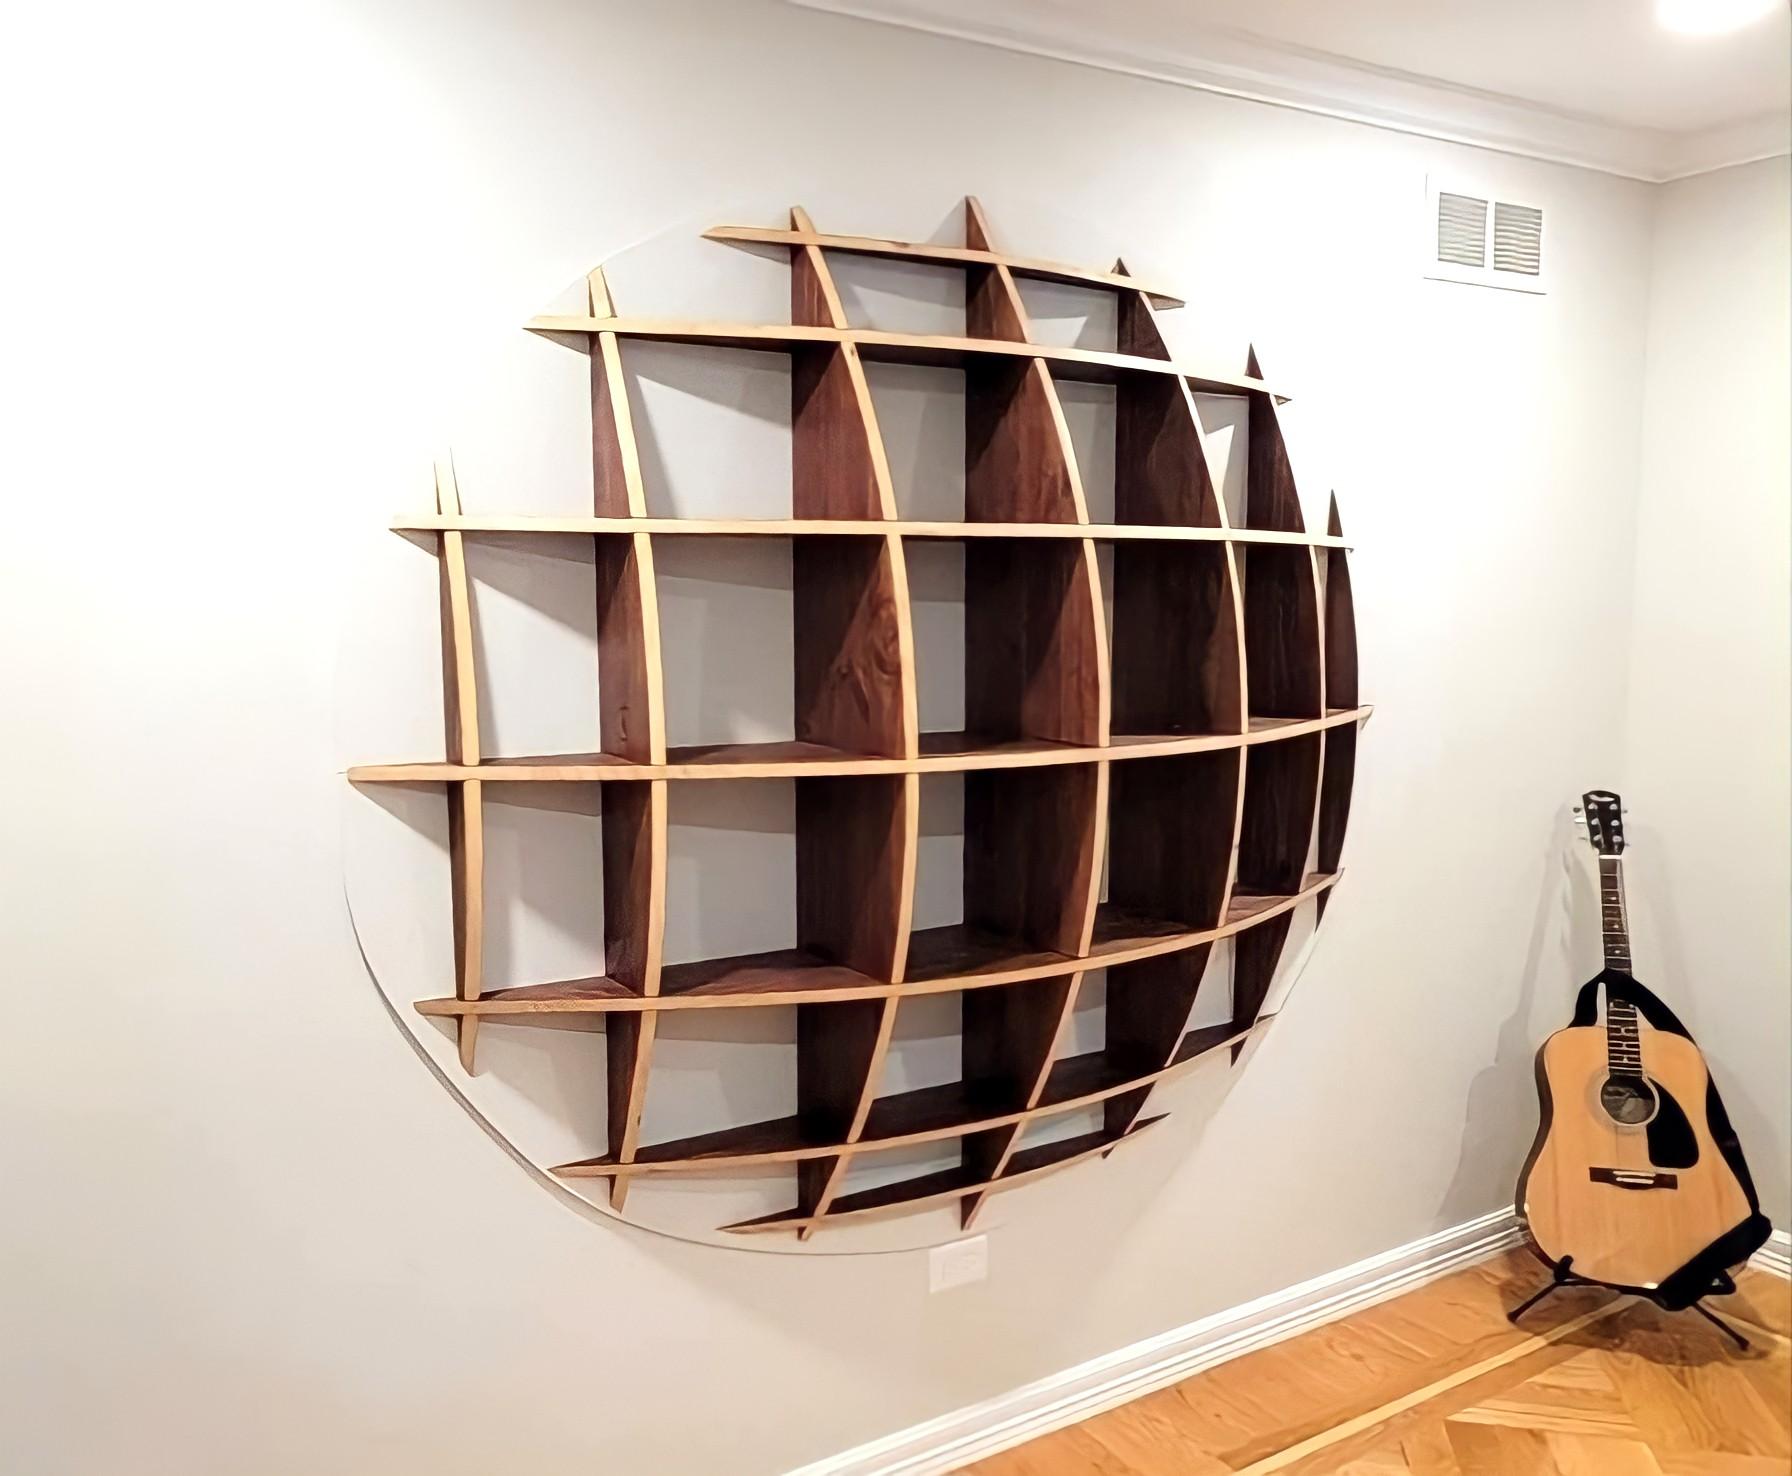 Oval pine shelves by David Renault
Dimensions: D 200 x H 170 cm
Materials: pine wood
Available in other wood shades and sizes.

Shelves made of solid pine from eco-responsible forests, because it is a fairly light but resistant for a piece of